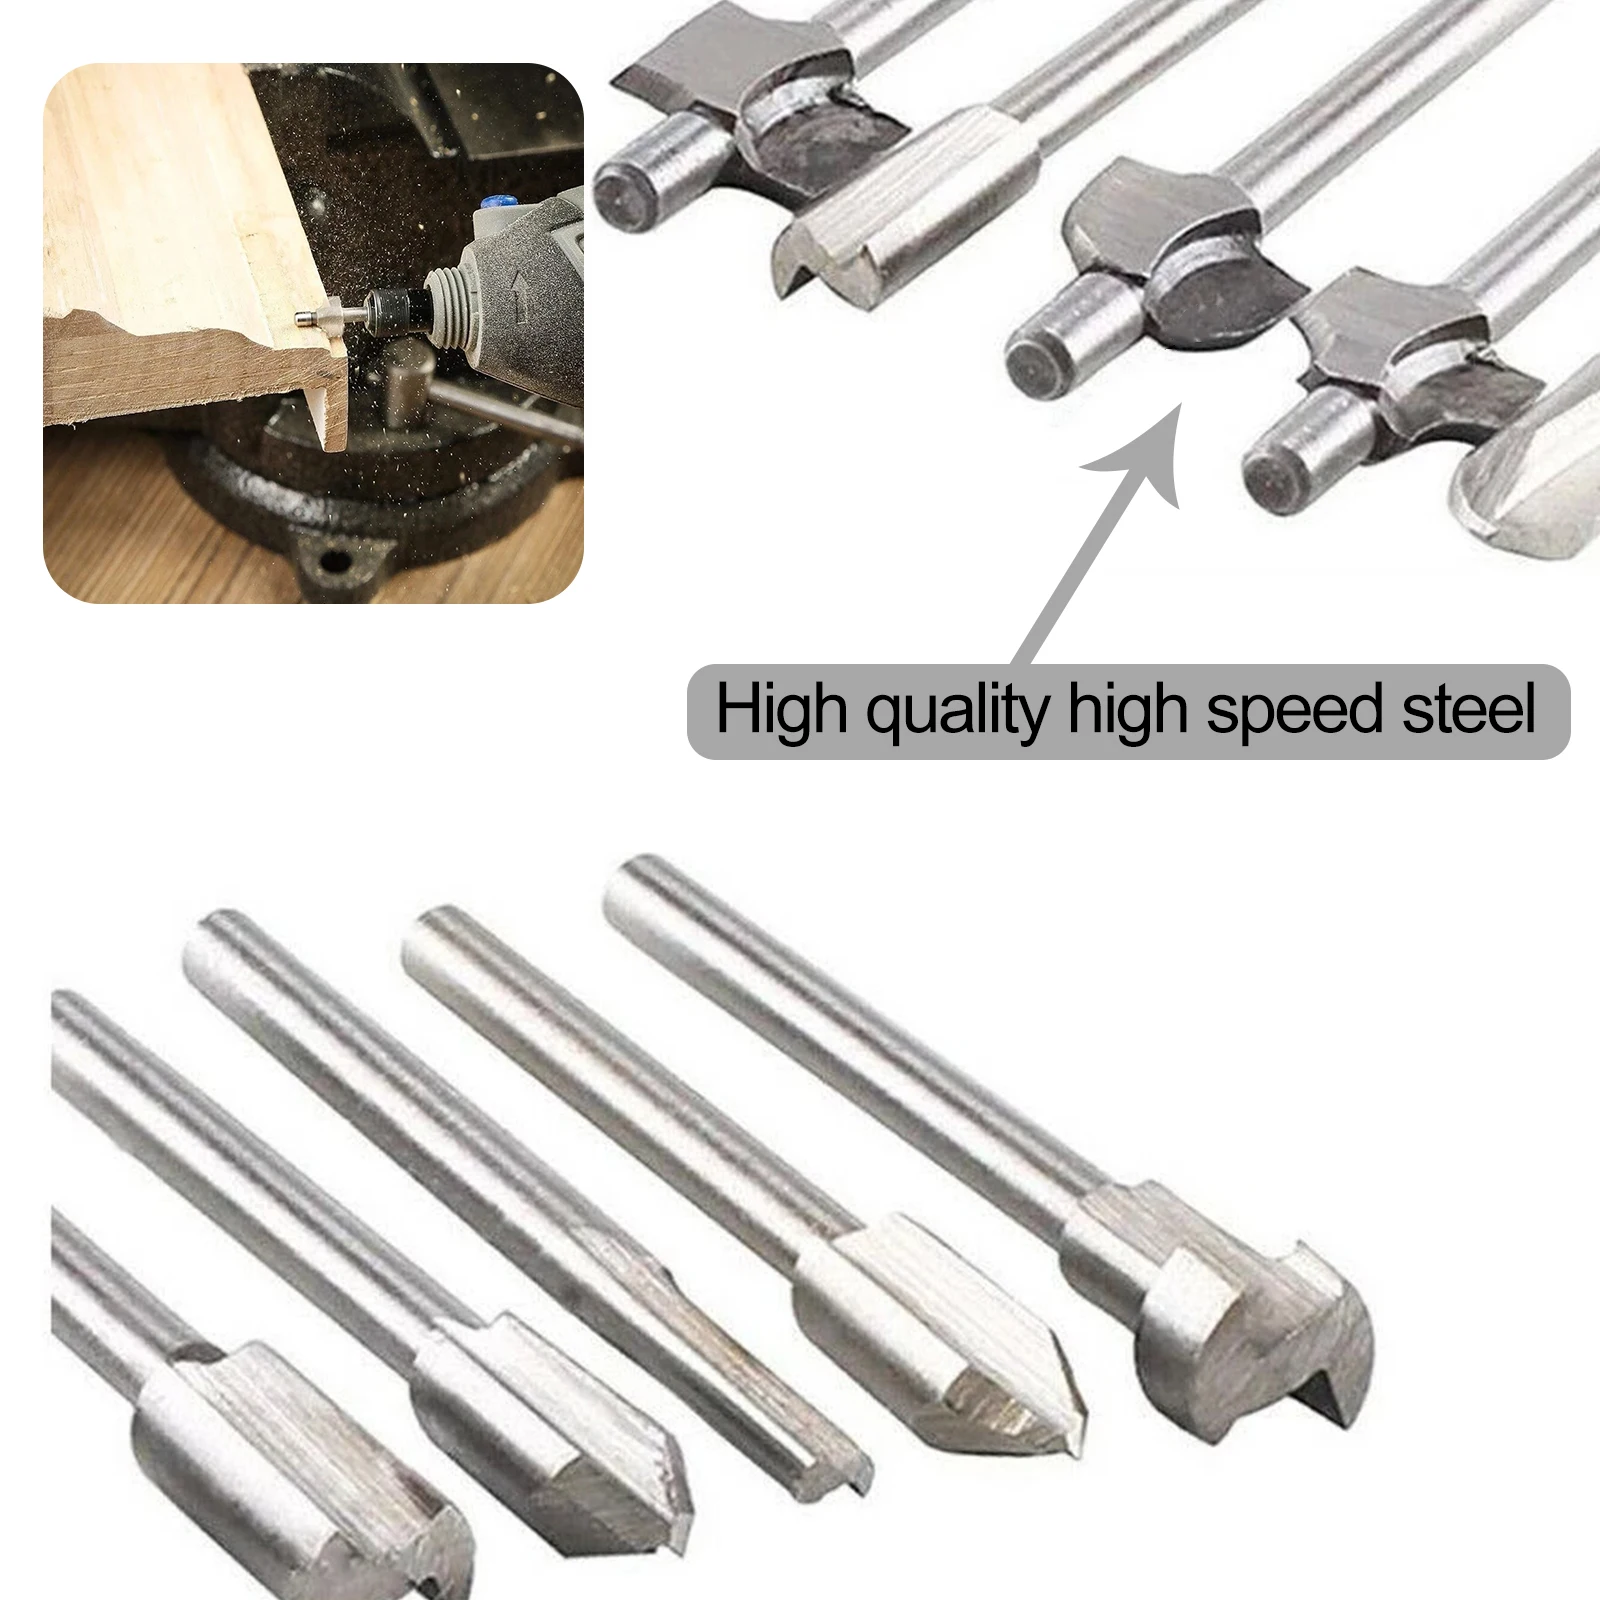 10pcs 3.2mm Routing Router Drill Bits Set Wood Stone Metal Root Carving Milling Cutter For Dremel Rotary Tool professional grade diamond files 10pcs titanium coated fine grinding ideal for metal wood stone jewelry